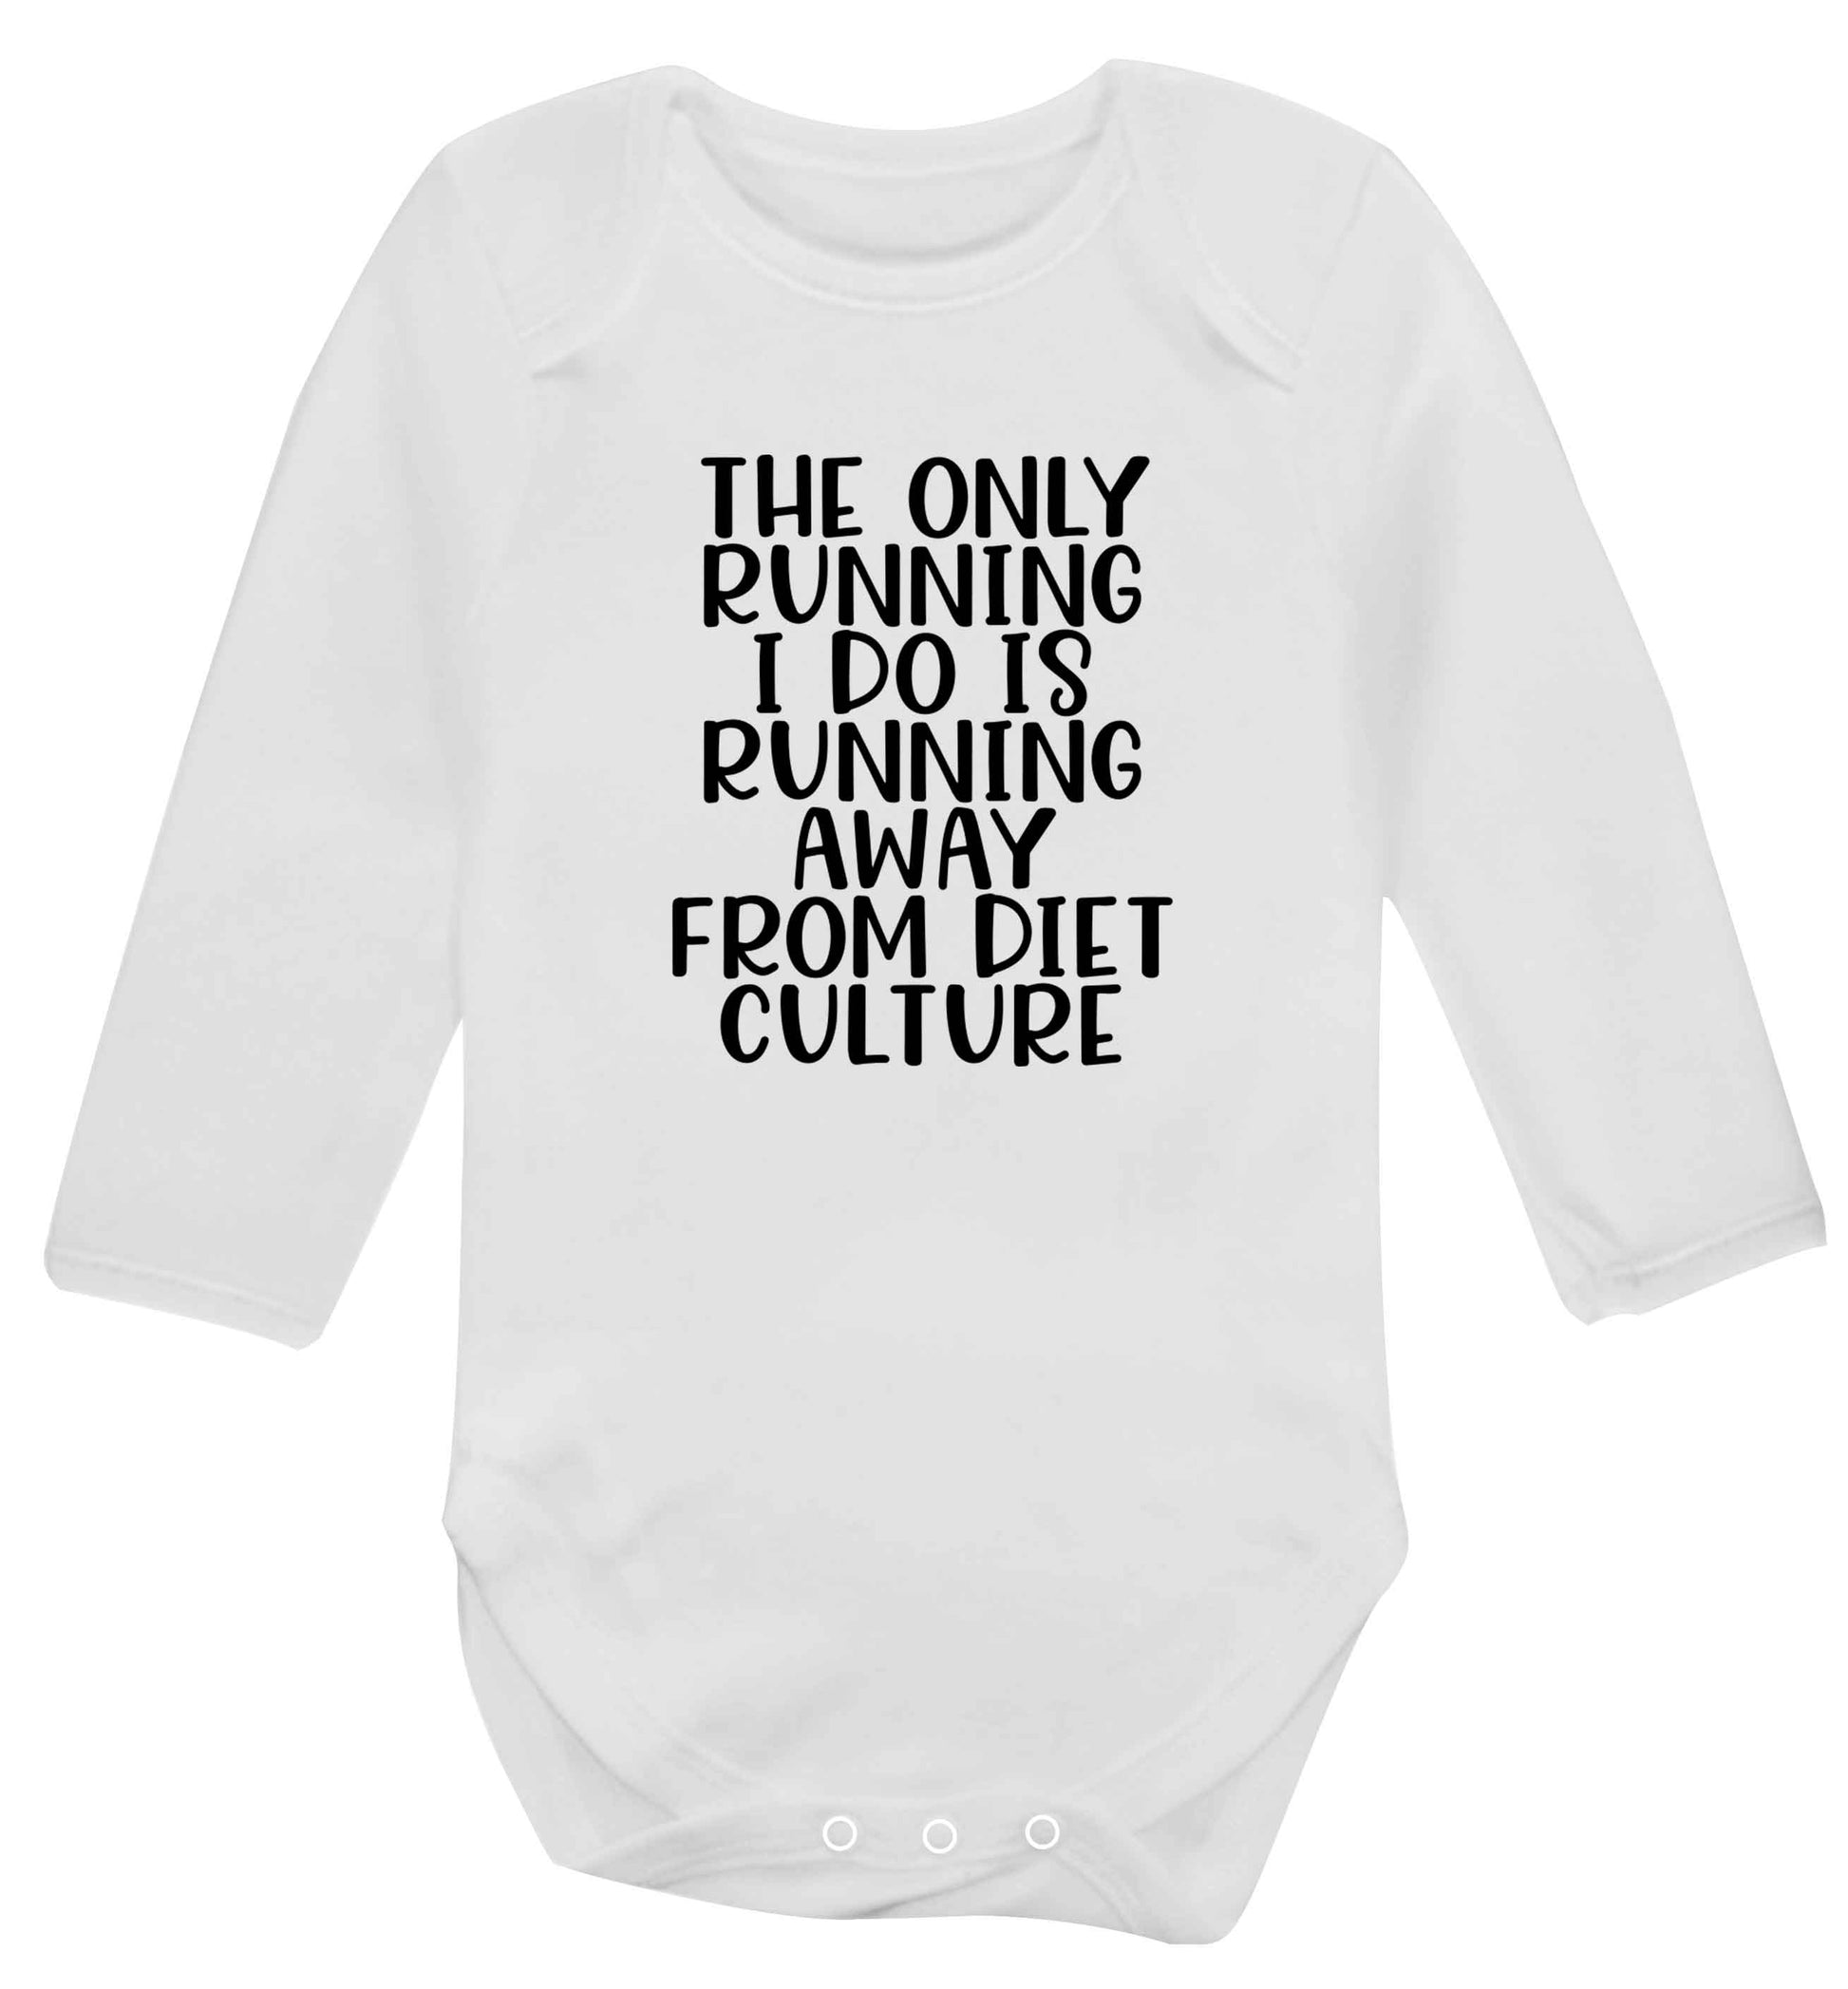 The only running I do is running away from diet culture baby vest long sleeved white 6-12 months